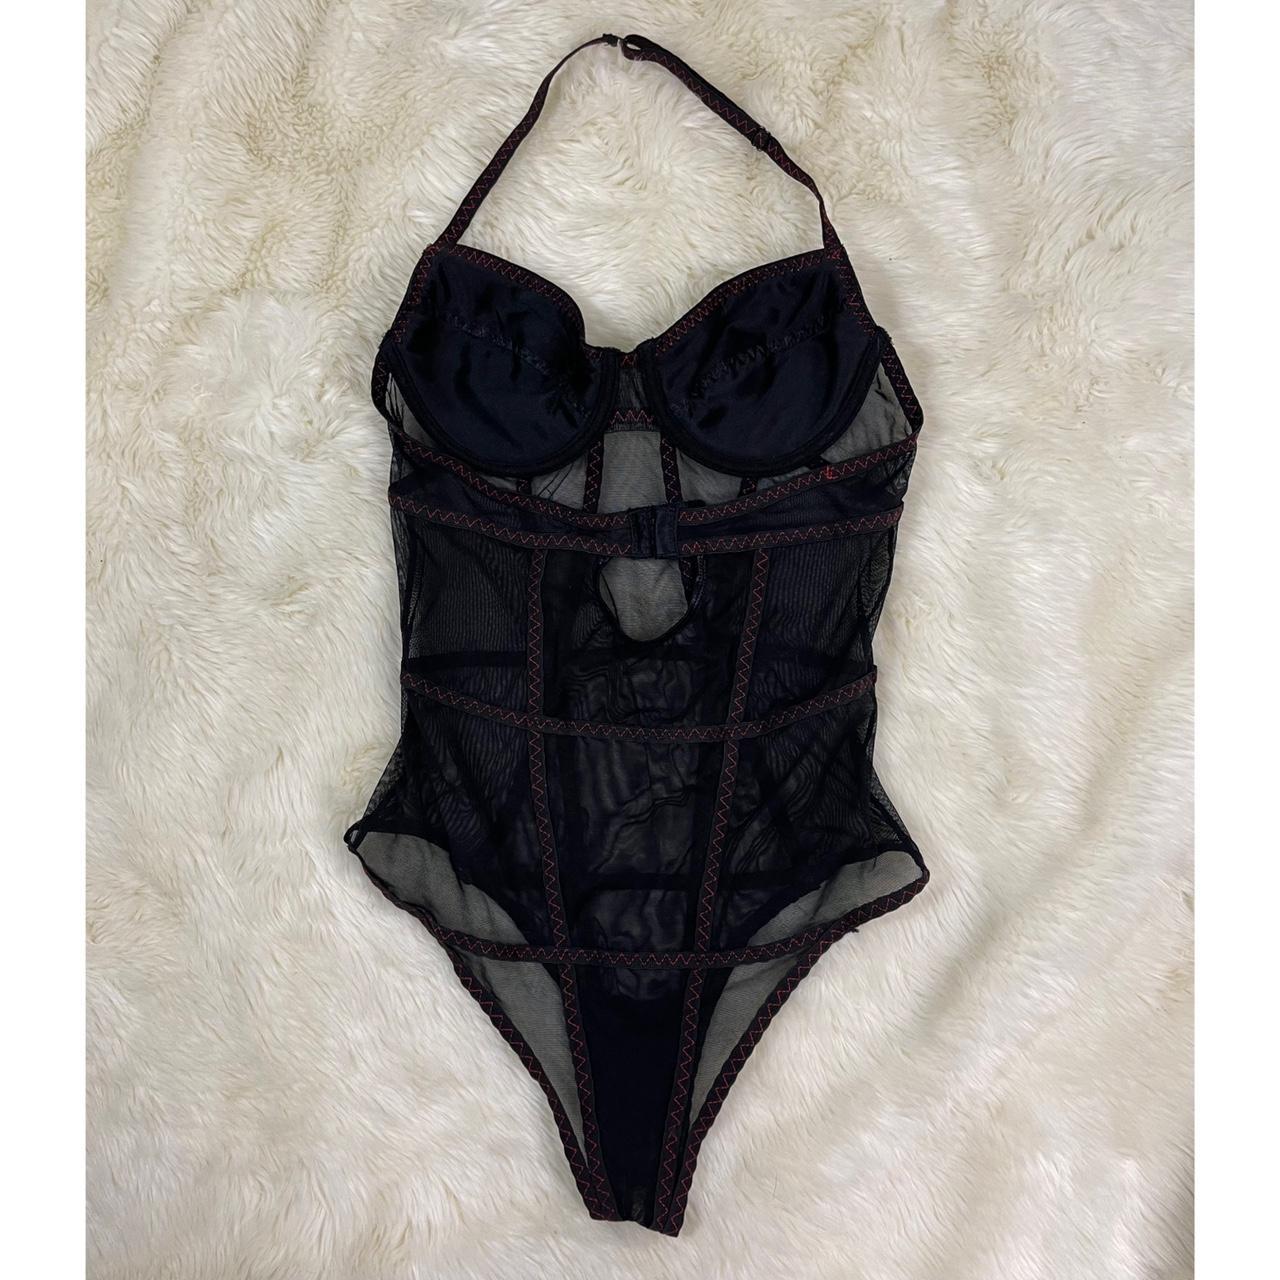 Sexy sheer black bodysuit with red trim and an... - Depop